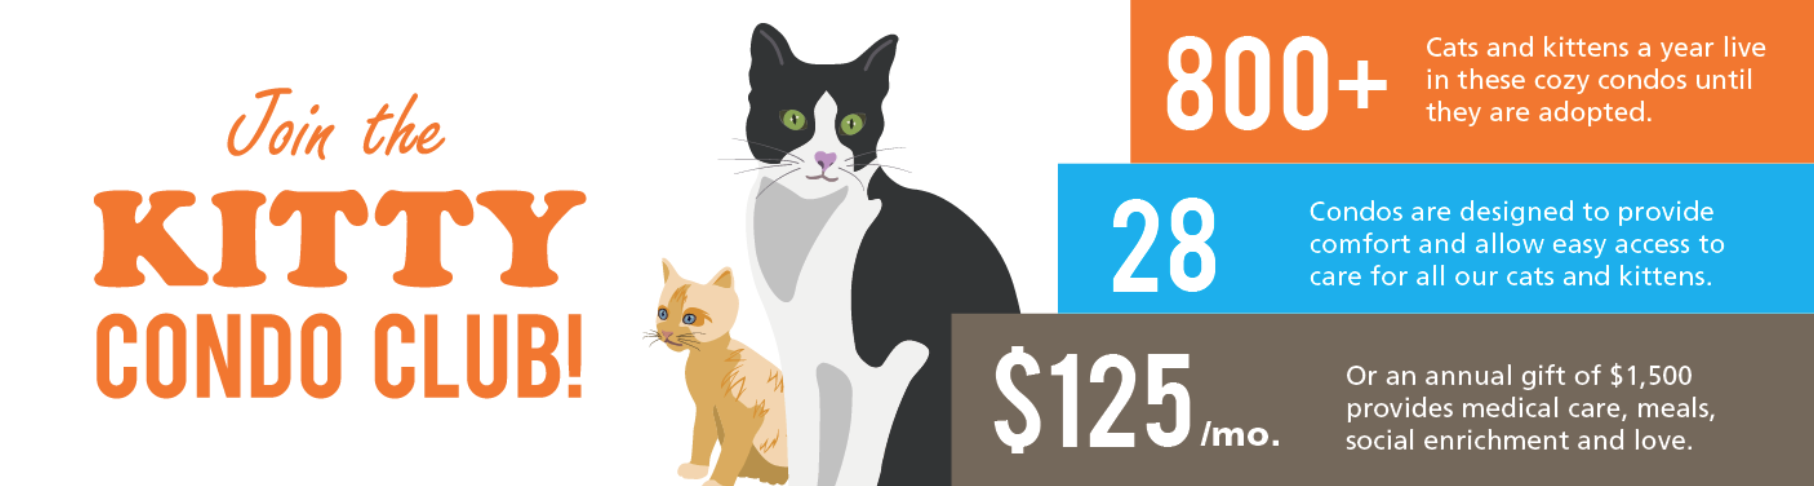 Make a big difference in the lives of Berkeley Humane’s cats, kittens, dogs, and puppies! Your club sponsorship underwrites the costs of medical care for hundreds of shelter pets waiting to be adopted over the course of one year. 